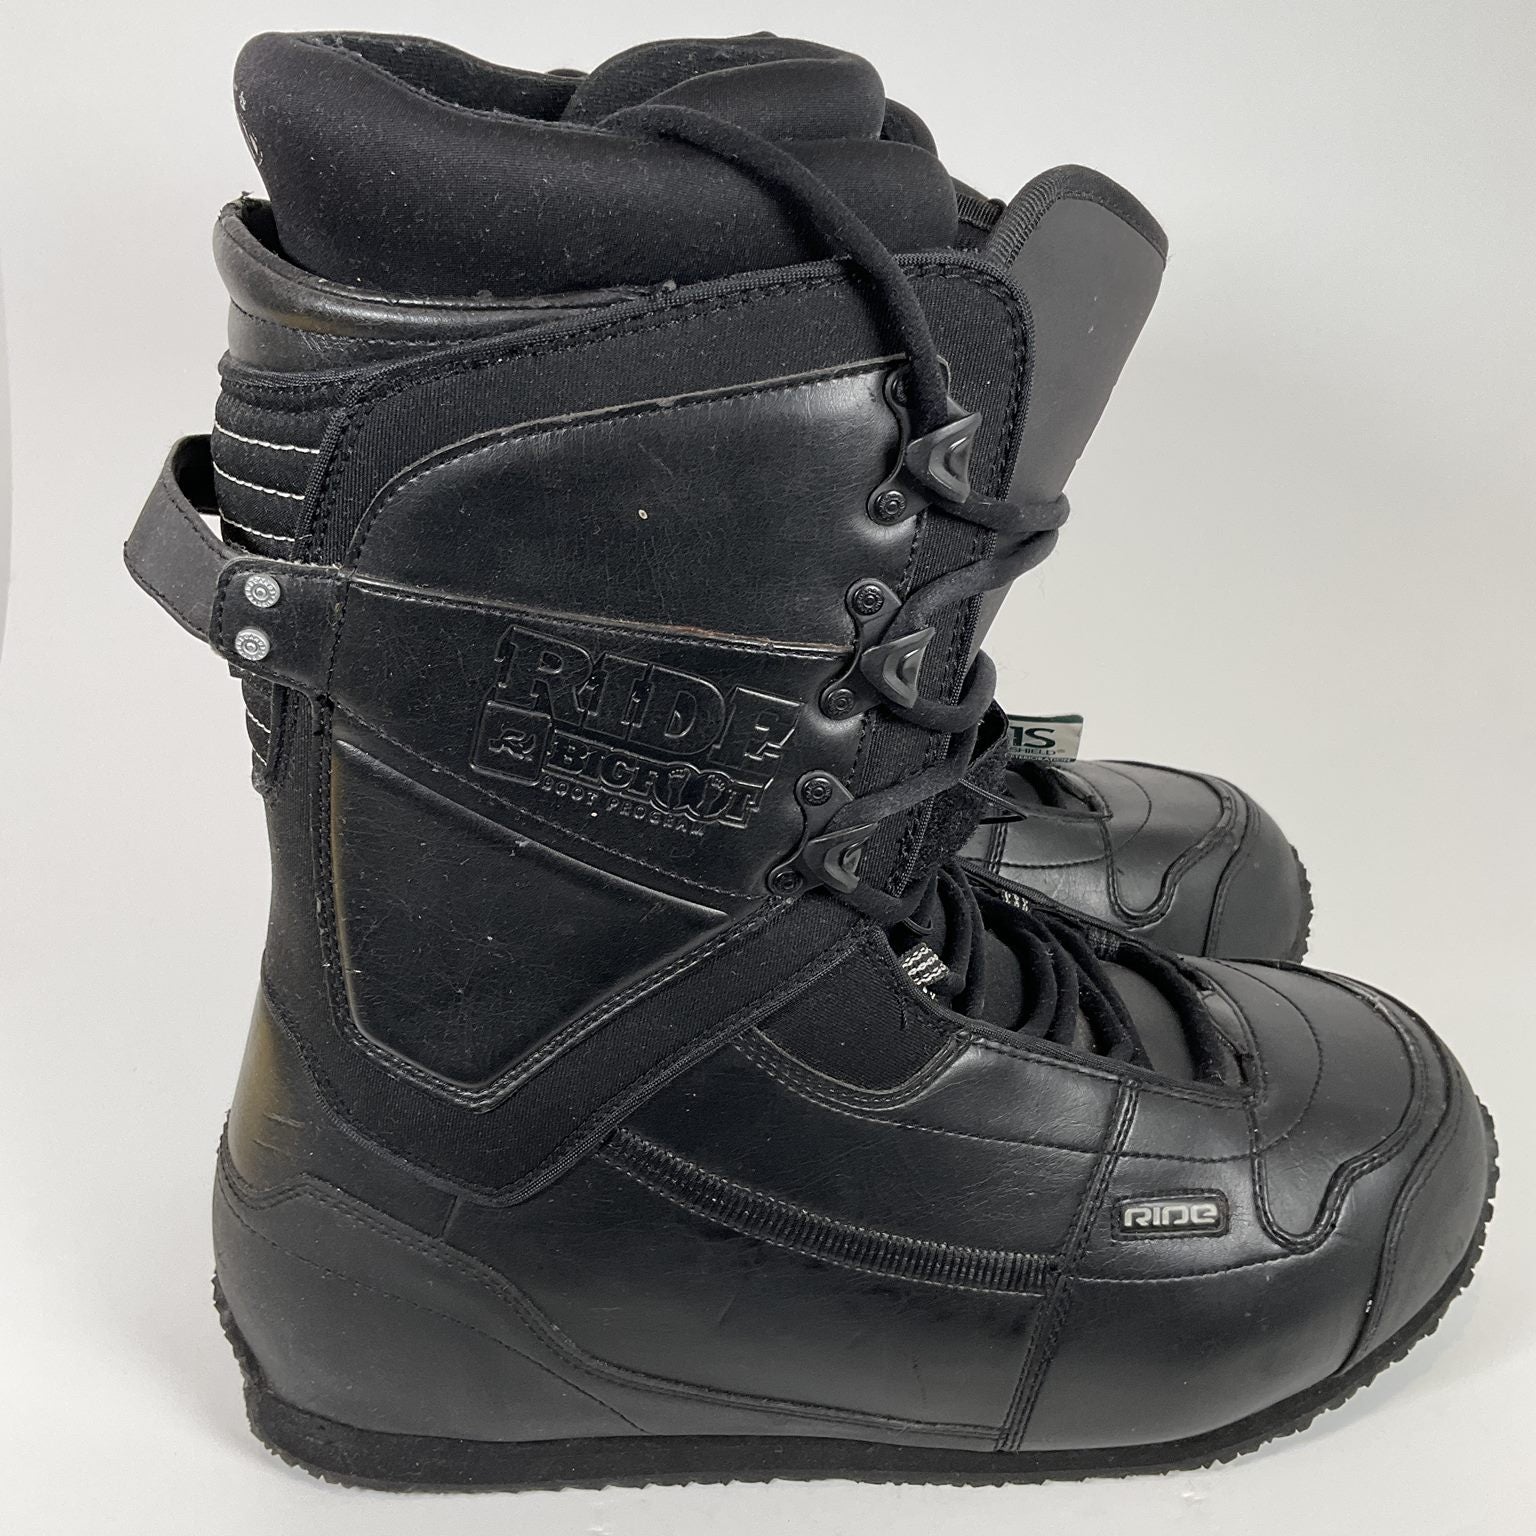 Ride Bigfoot - Snowboarding Boots Size 16 Shoes